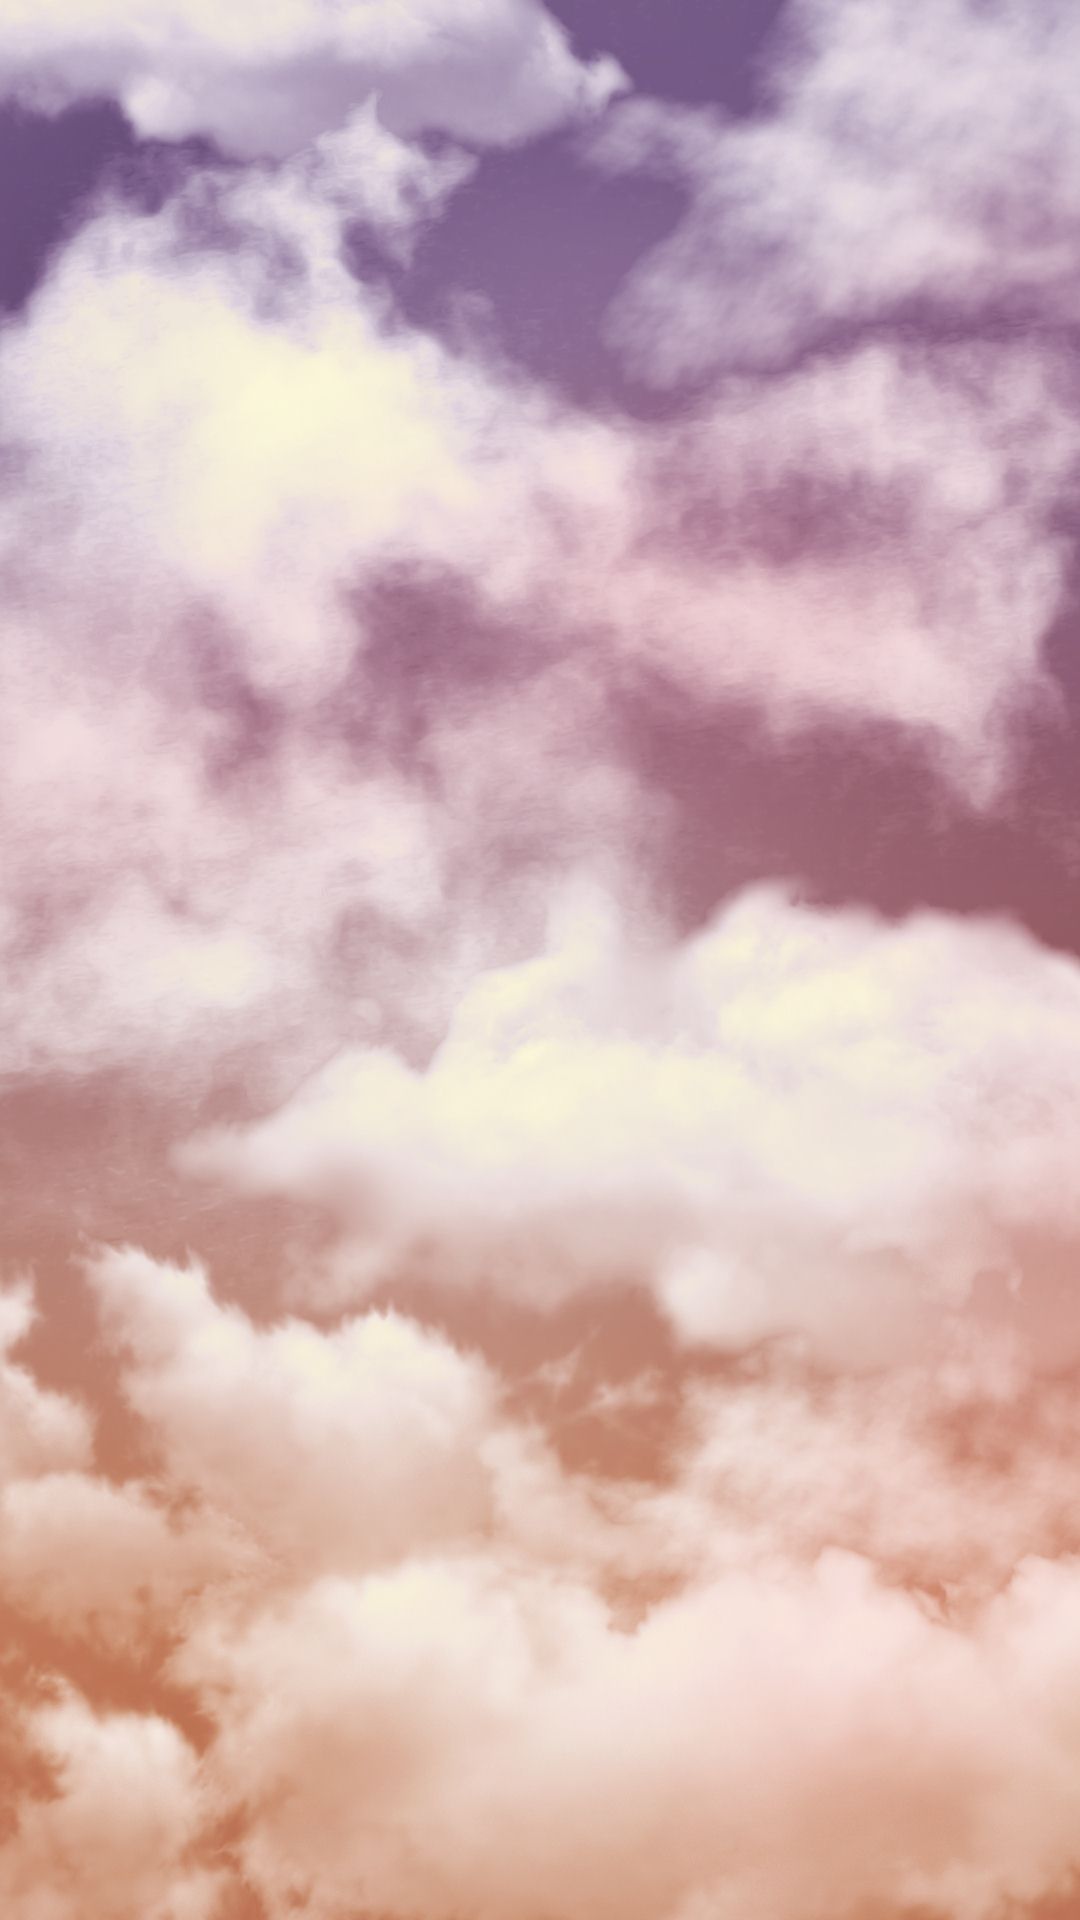 wallpapers for tumblr,sky,cloud,daytime,cumulus,pink